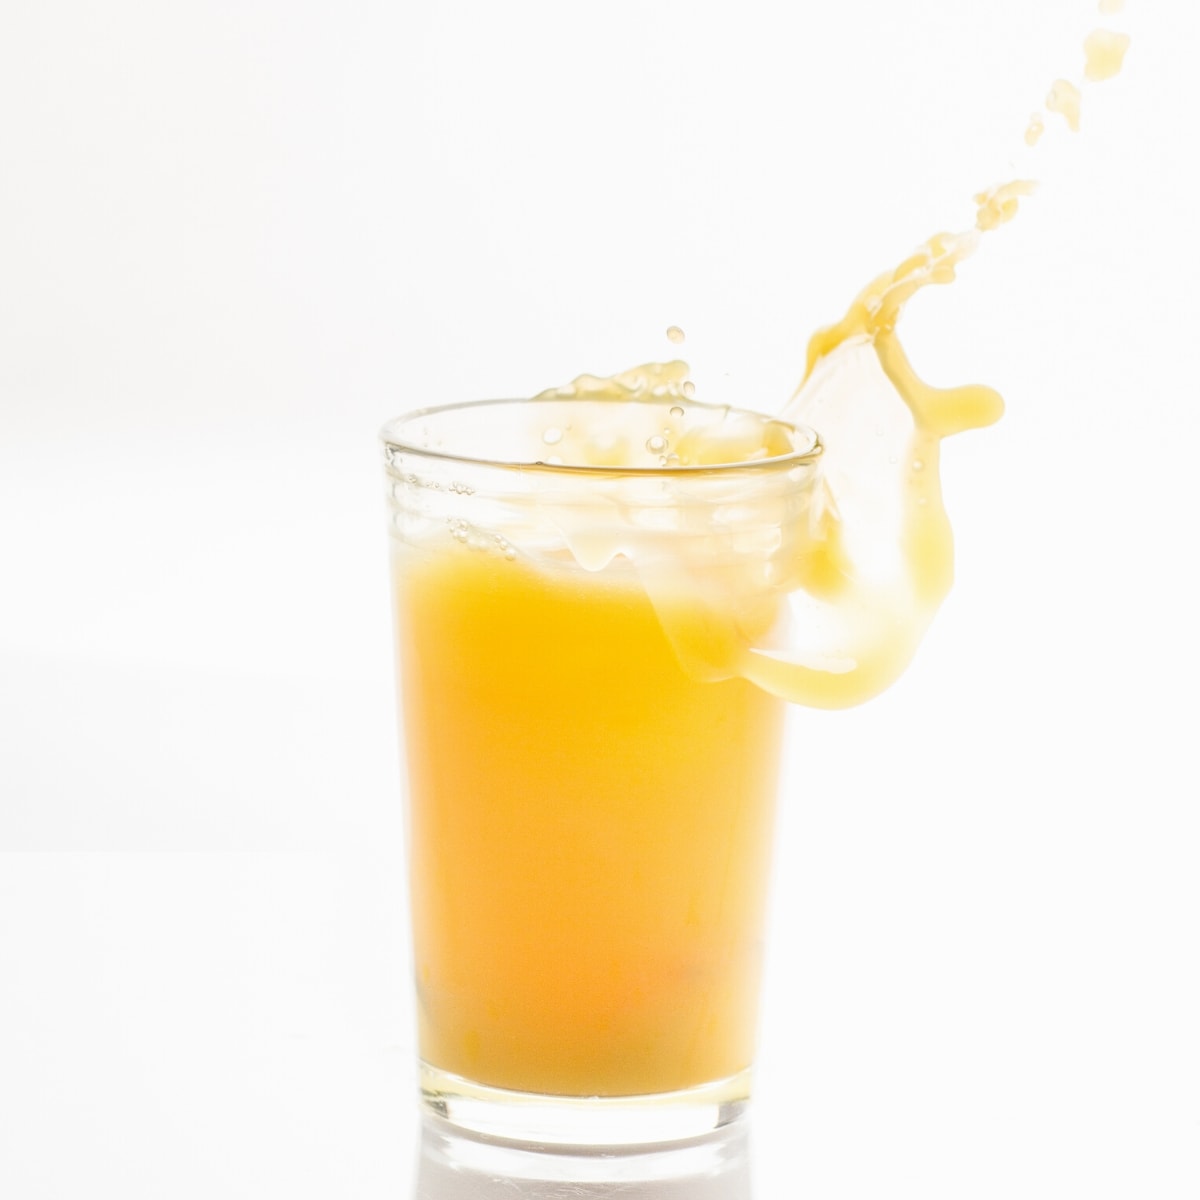 A tall clear glass filled with orange juice.